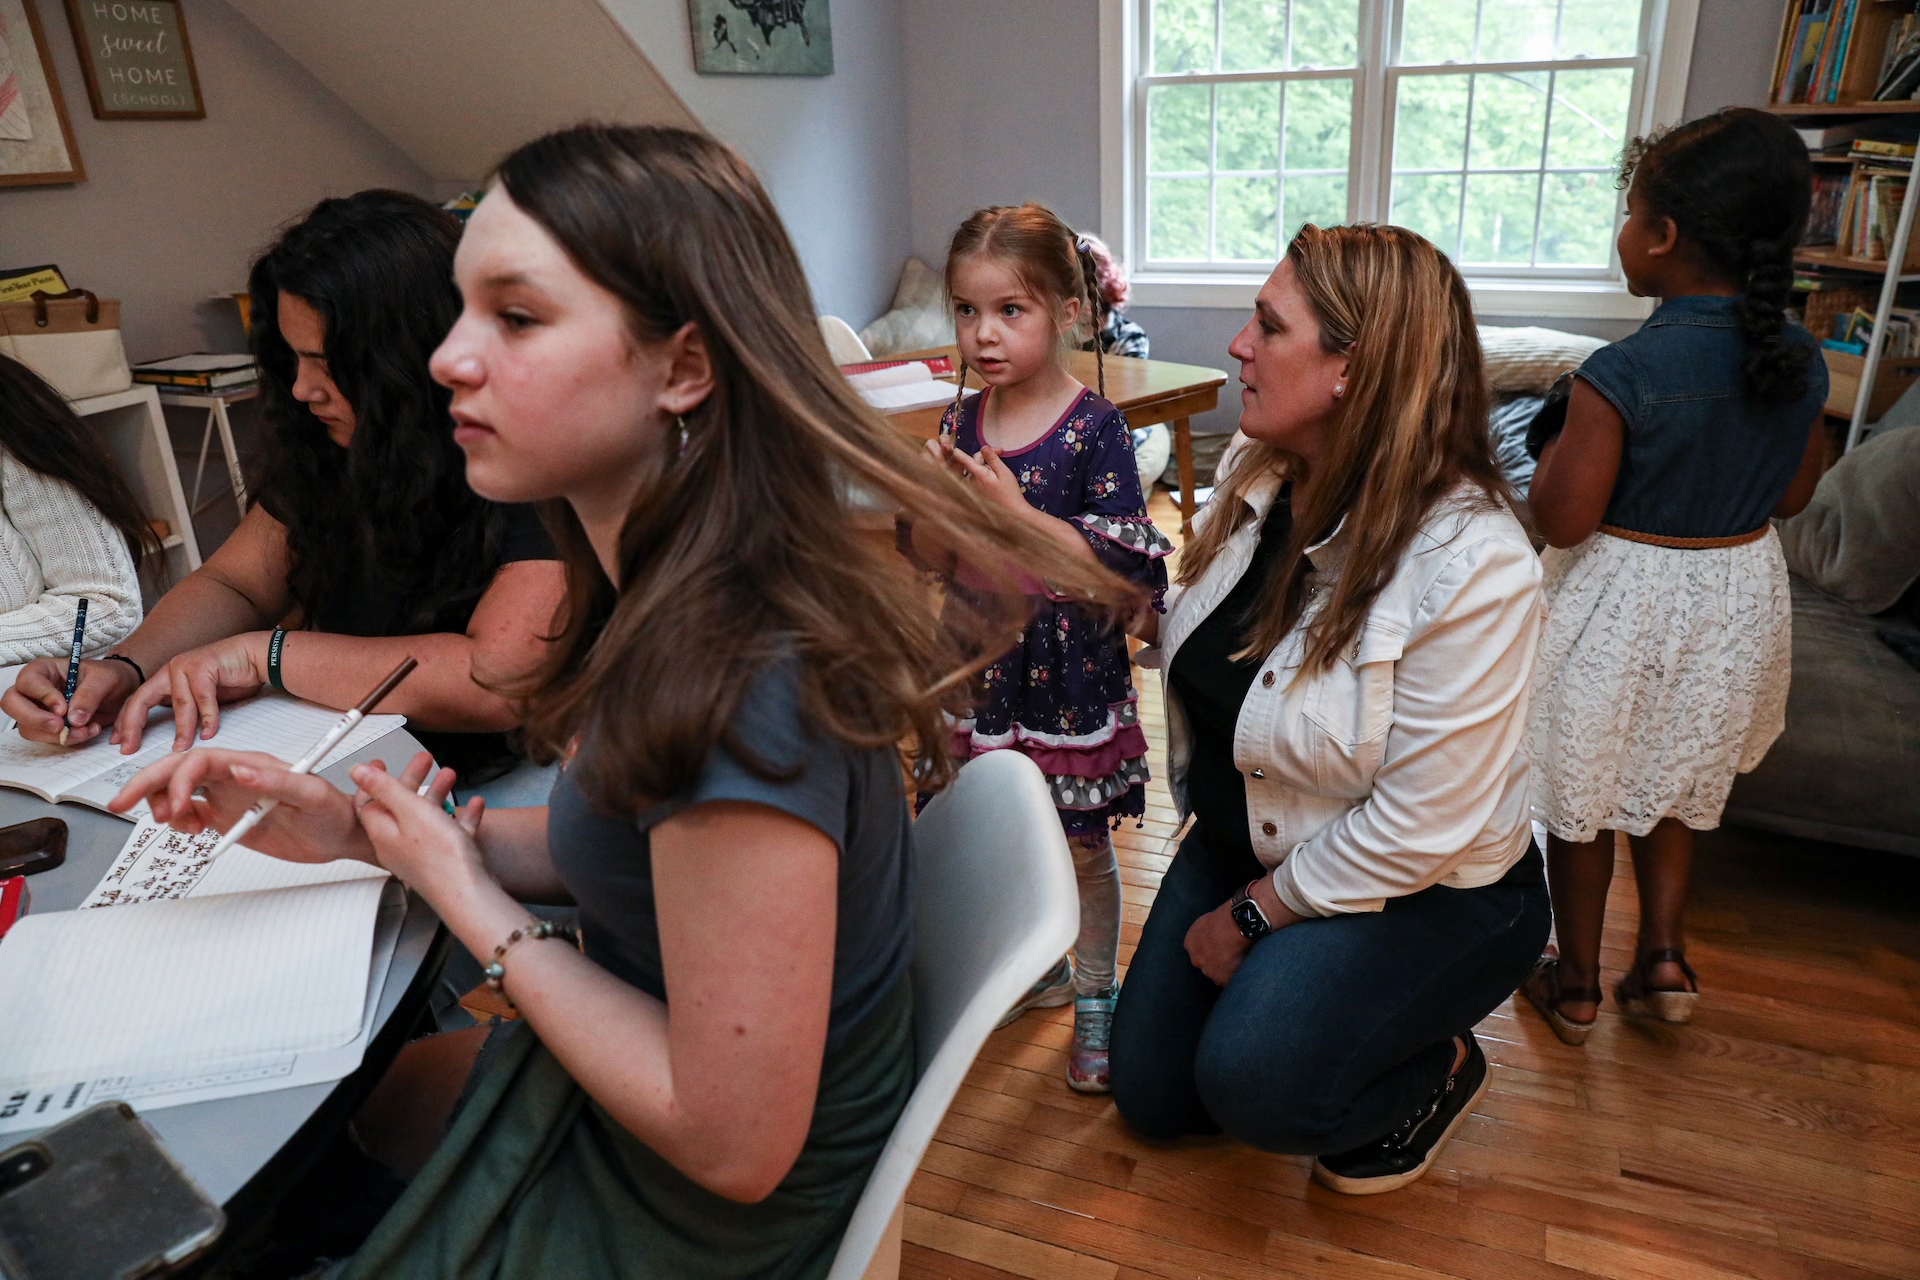 For many home schoolers, parents are no longer doing the teaching